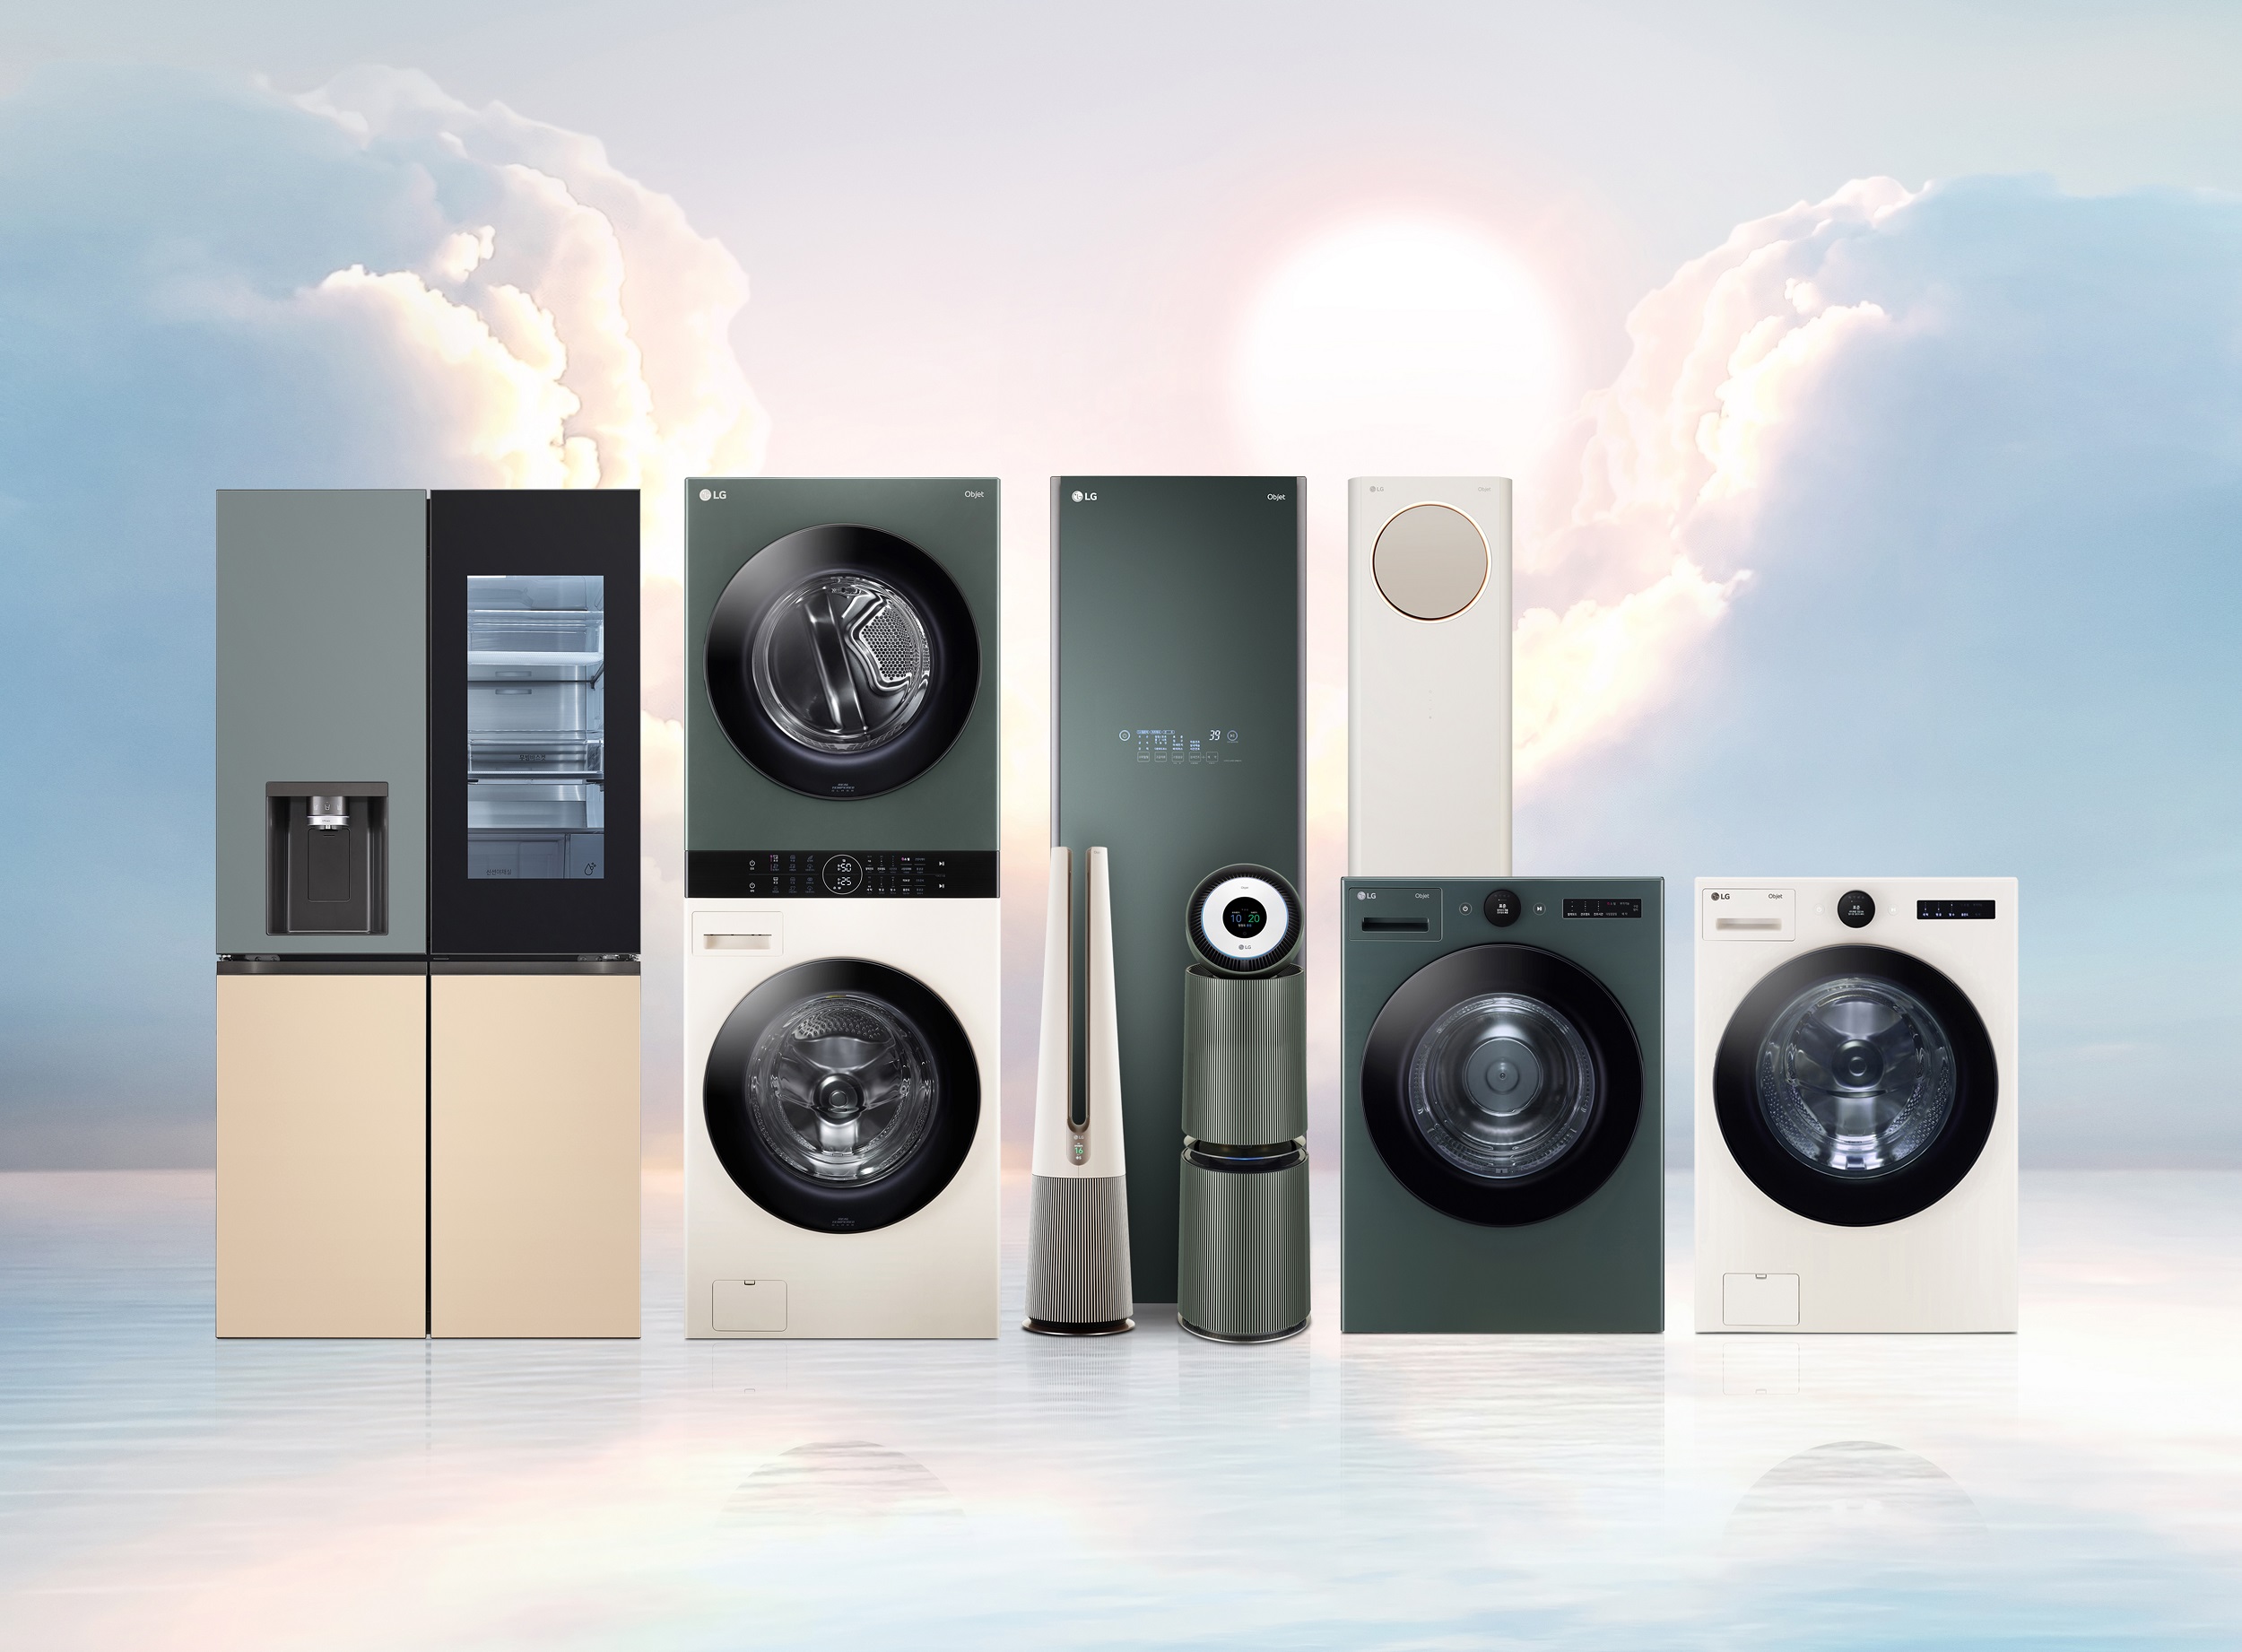 LG Sets New Paradigm With Upgradable Home Appliances That Deliver More